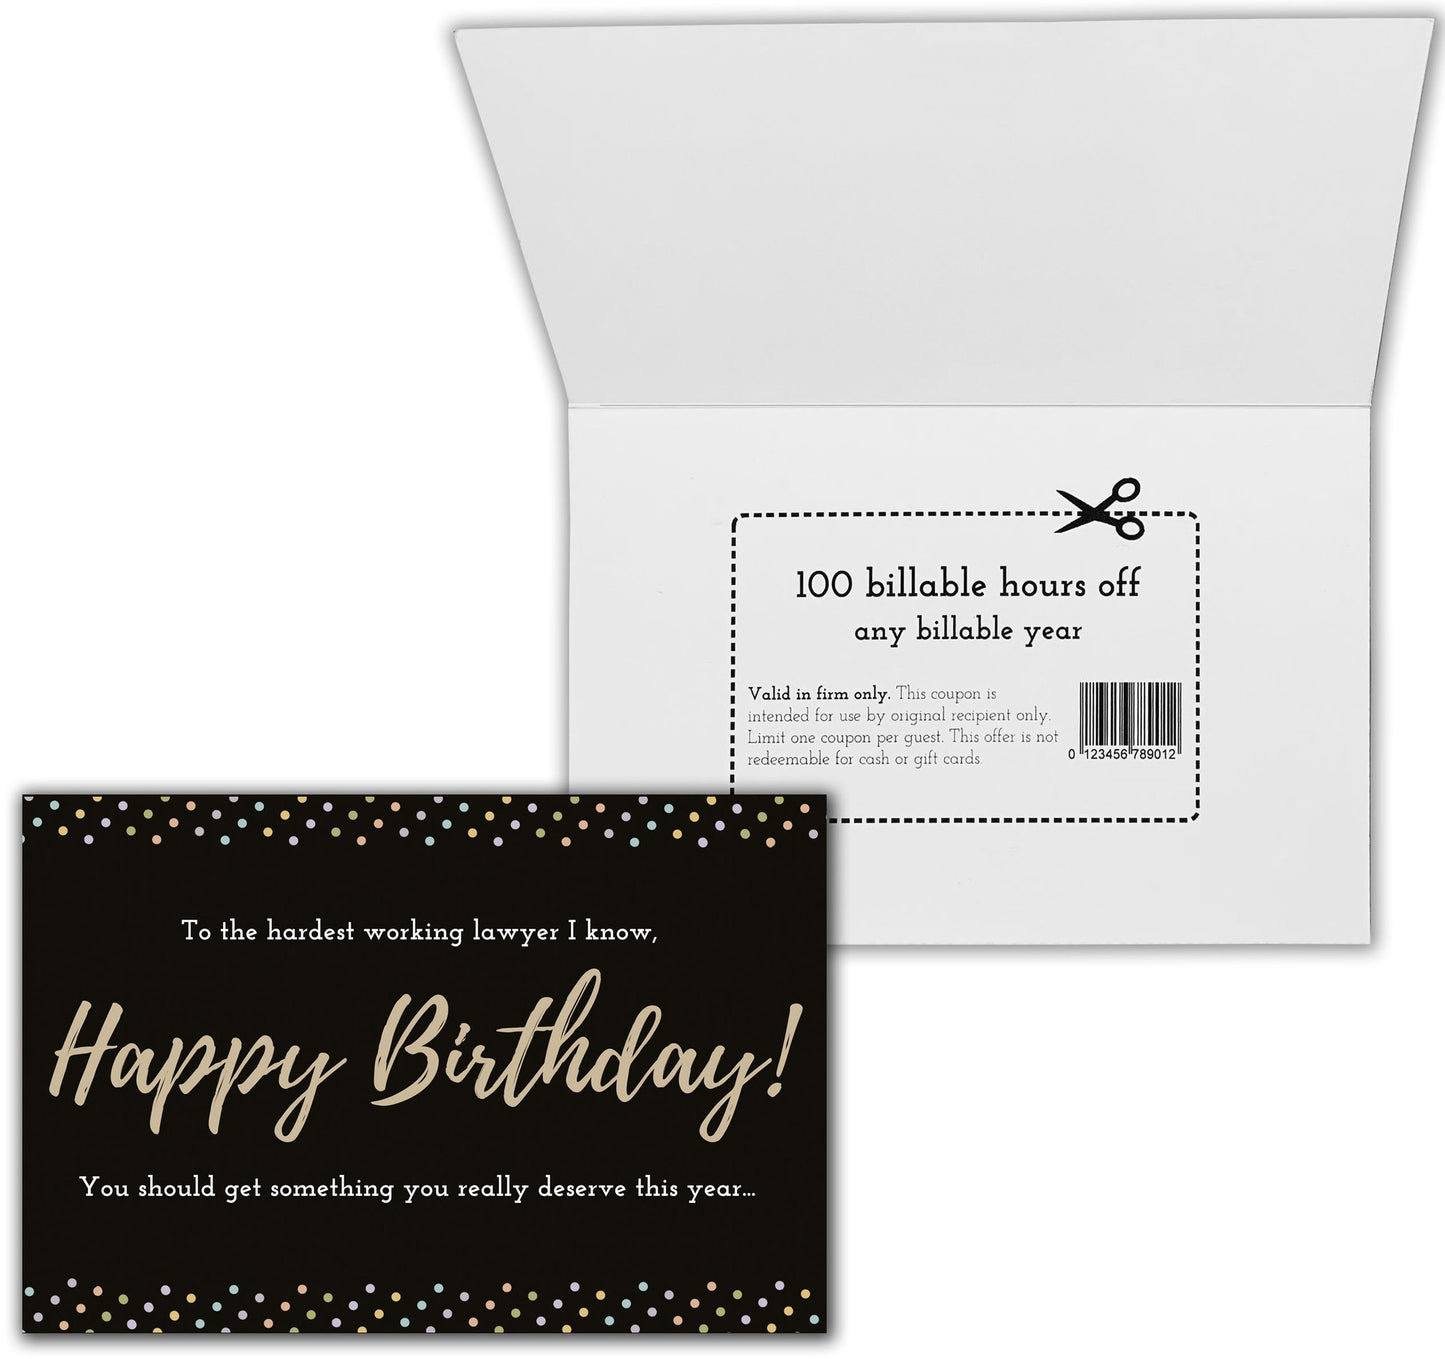 Happy Birthday Lawyer Gift Box | Lawyer Birthday Box | Birthday Care Package for Lawyers | Attorney Birthday Gifts